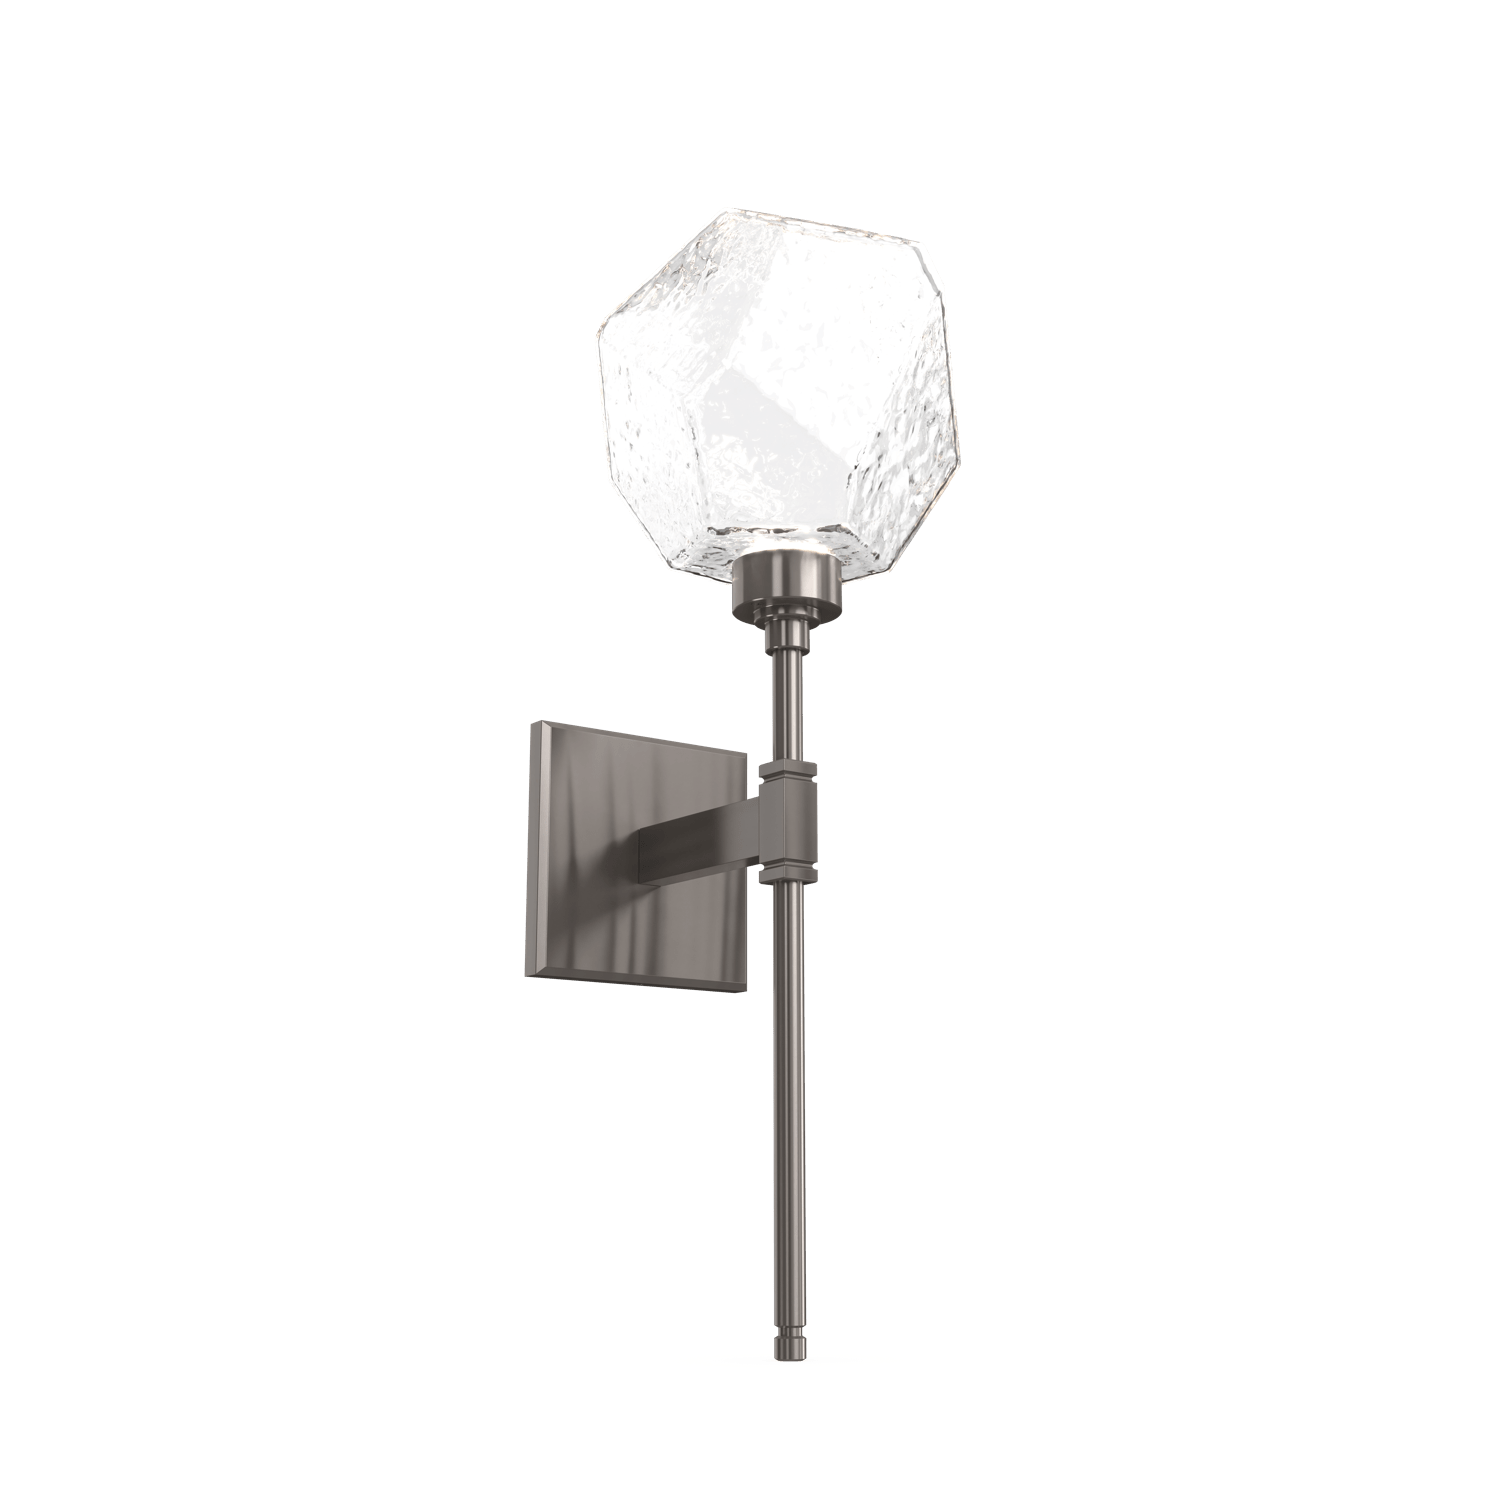 IDB0039-08-GM-C-Hammerton-Studio-Gem-belvedere-wall-sconce-with-gunmetal-finish-and-clear-blown-glass-shades-and-LED-lamping